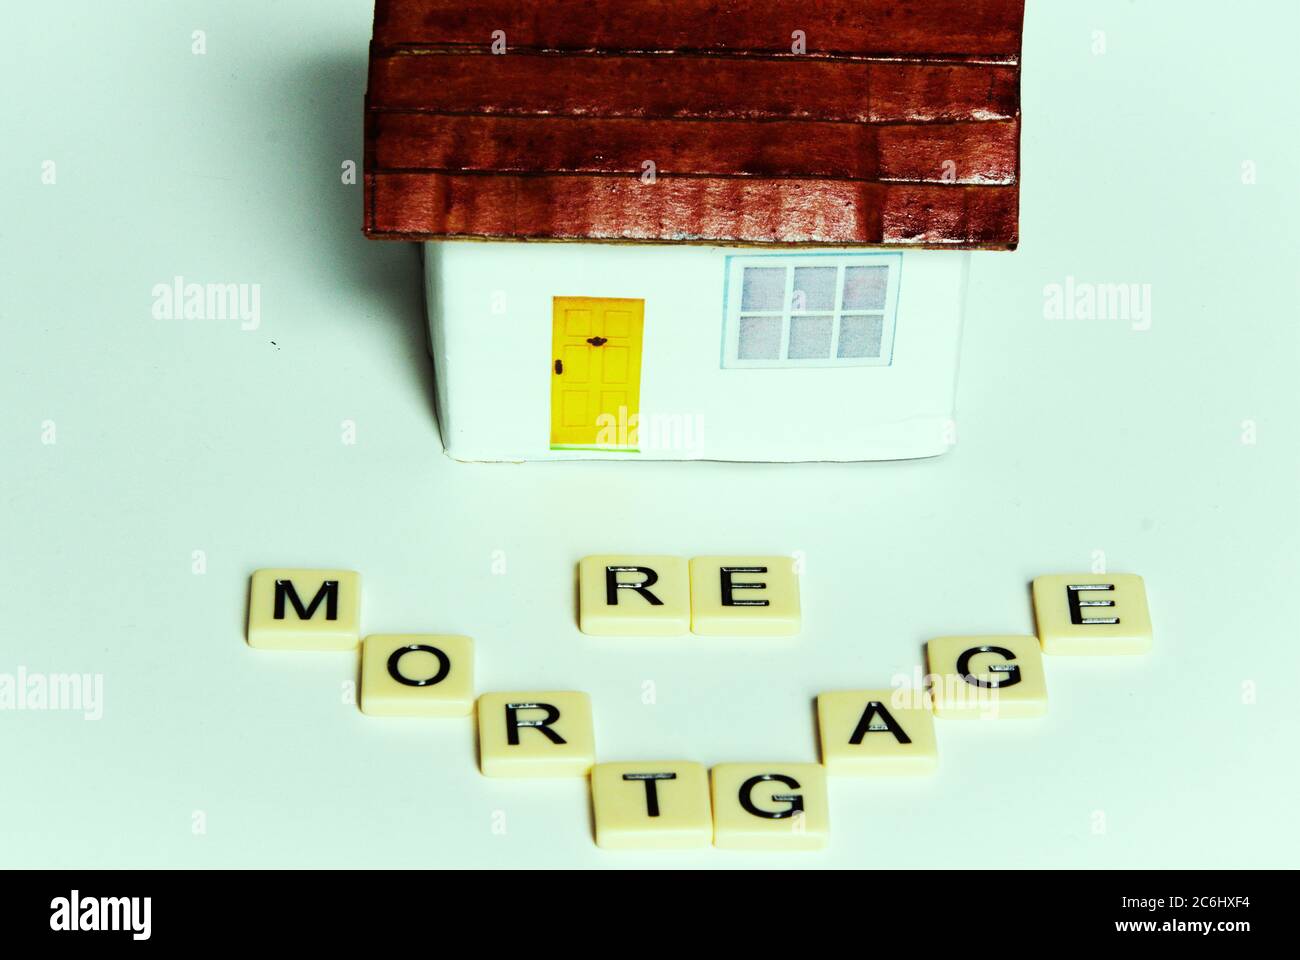 Financial concept image. simle toy house. Cost of  Covid 19 to economy and savings. Need to re-mortgage, take money out of property to survive.  Words Stock Photo